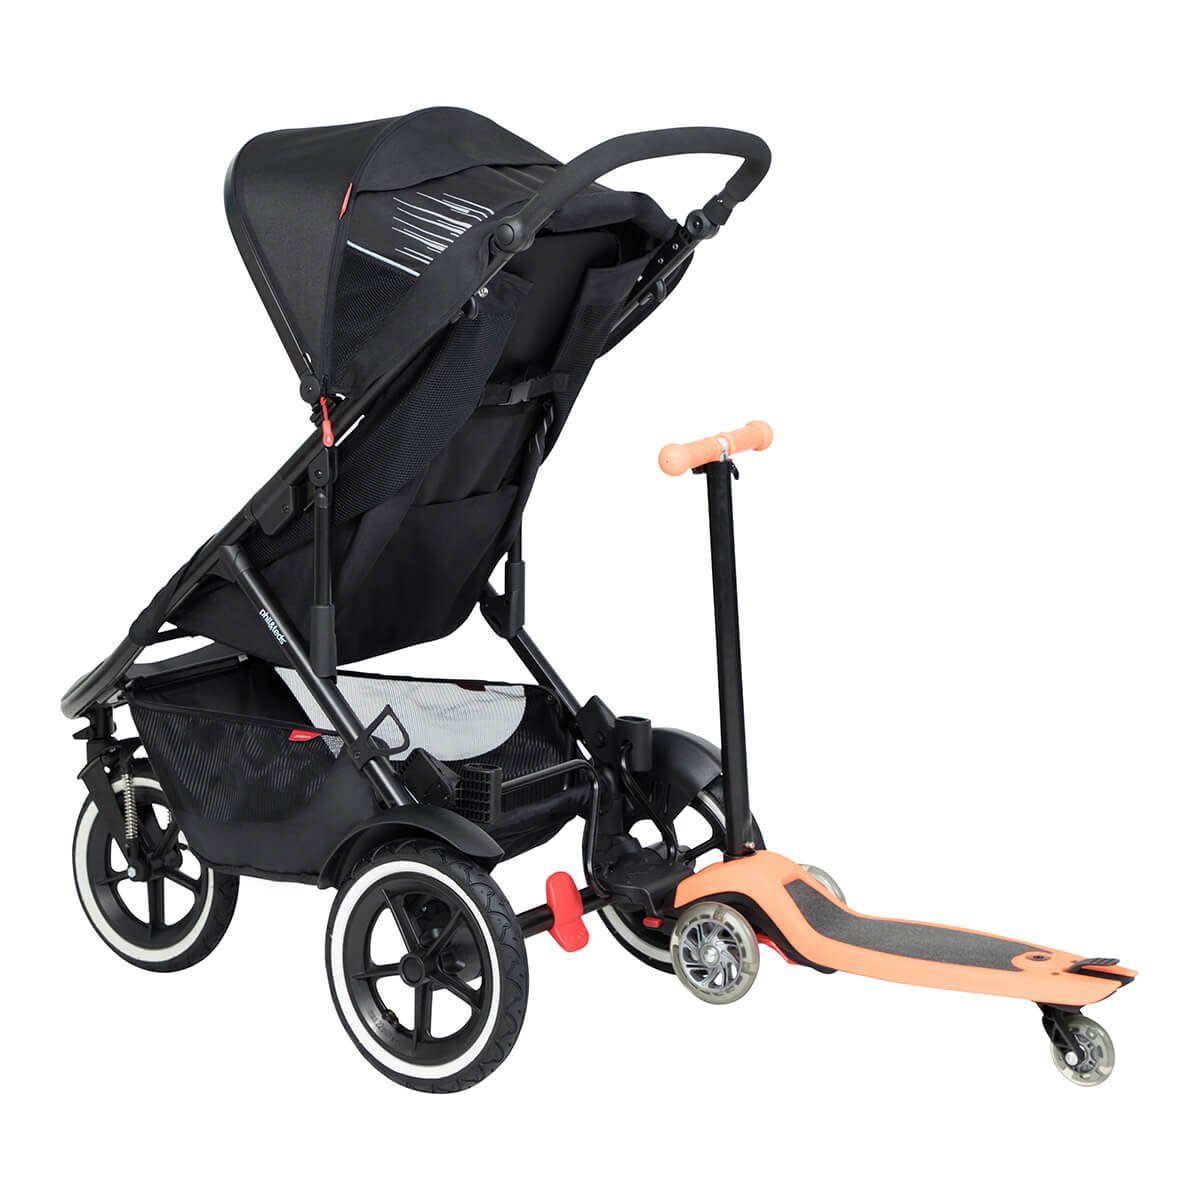 https://cdn.accentuate.io/7344766746808/19440099852472/philteds-sport-buggy-with-freerider-stroller-board-in-rear-v1700697750558.jpg?1200x1200